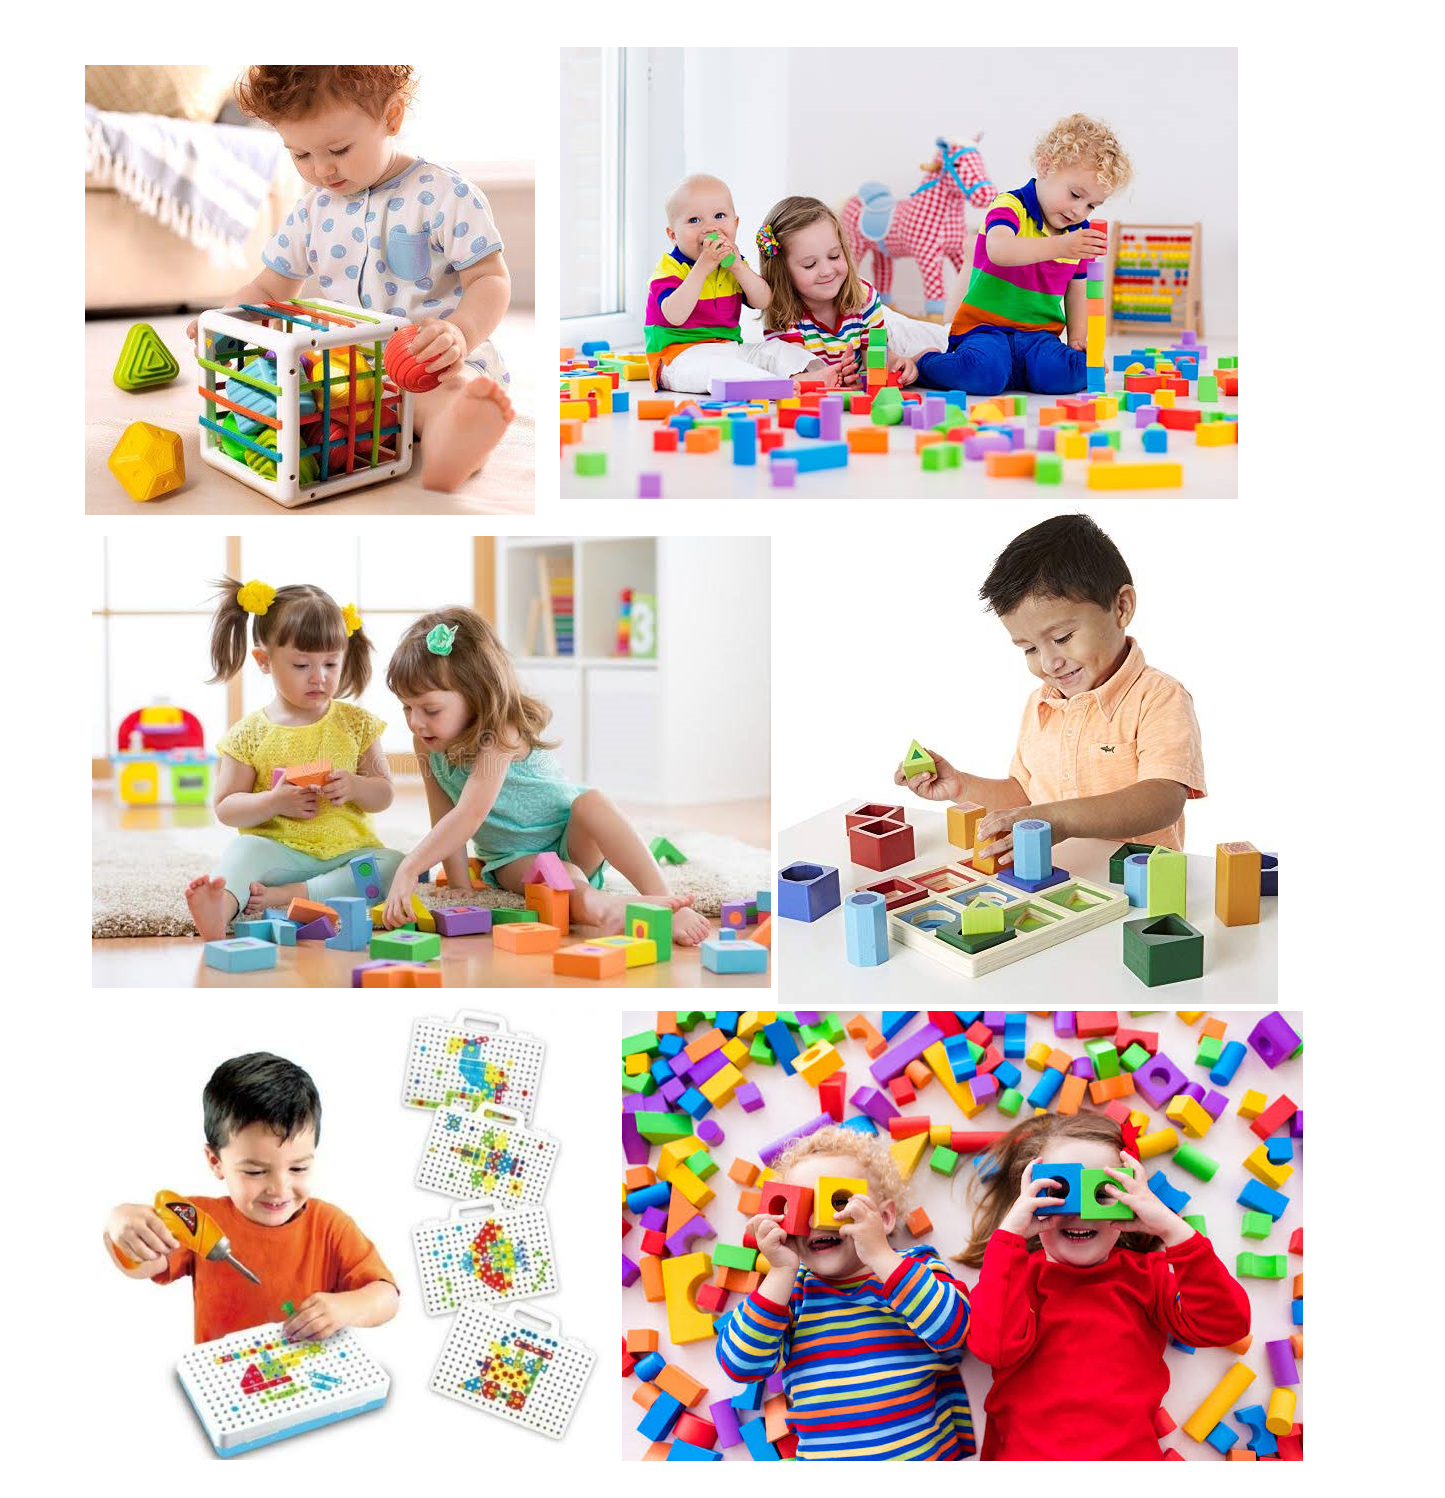 Children playing with educational toys Blank Meme Template